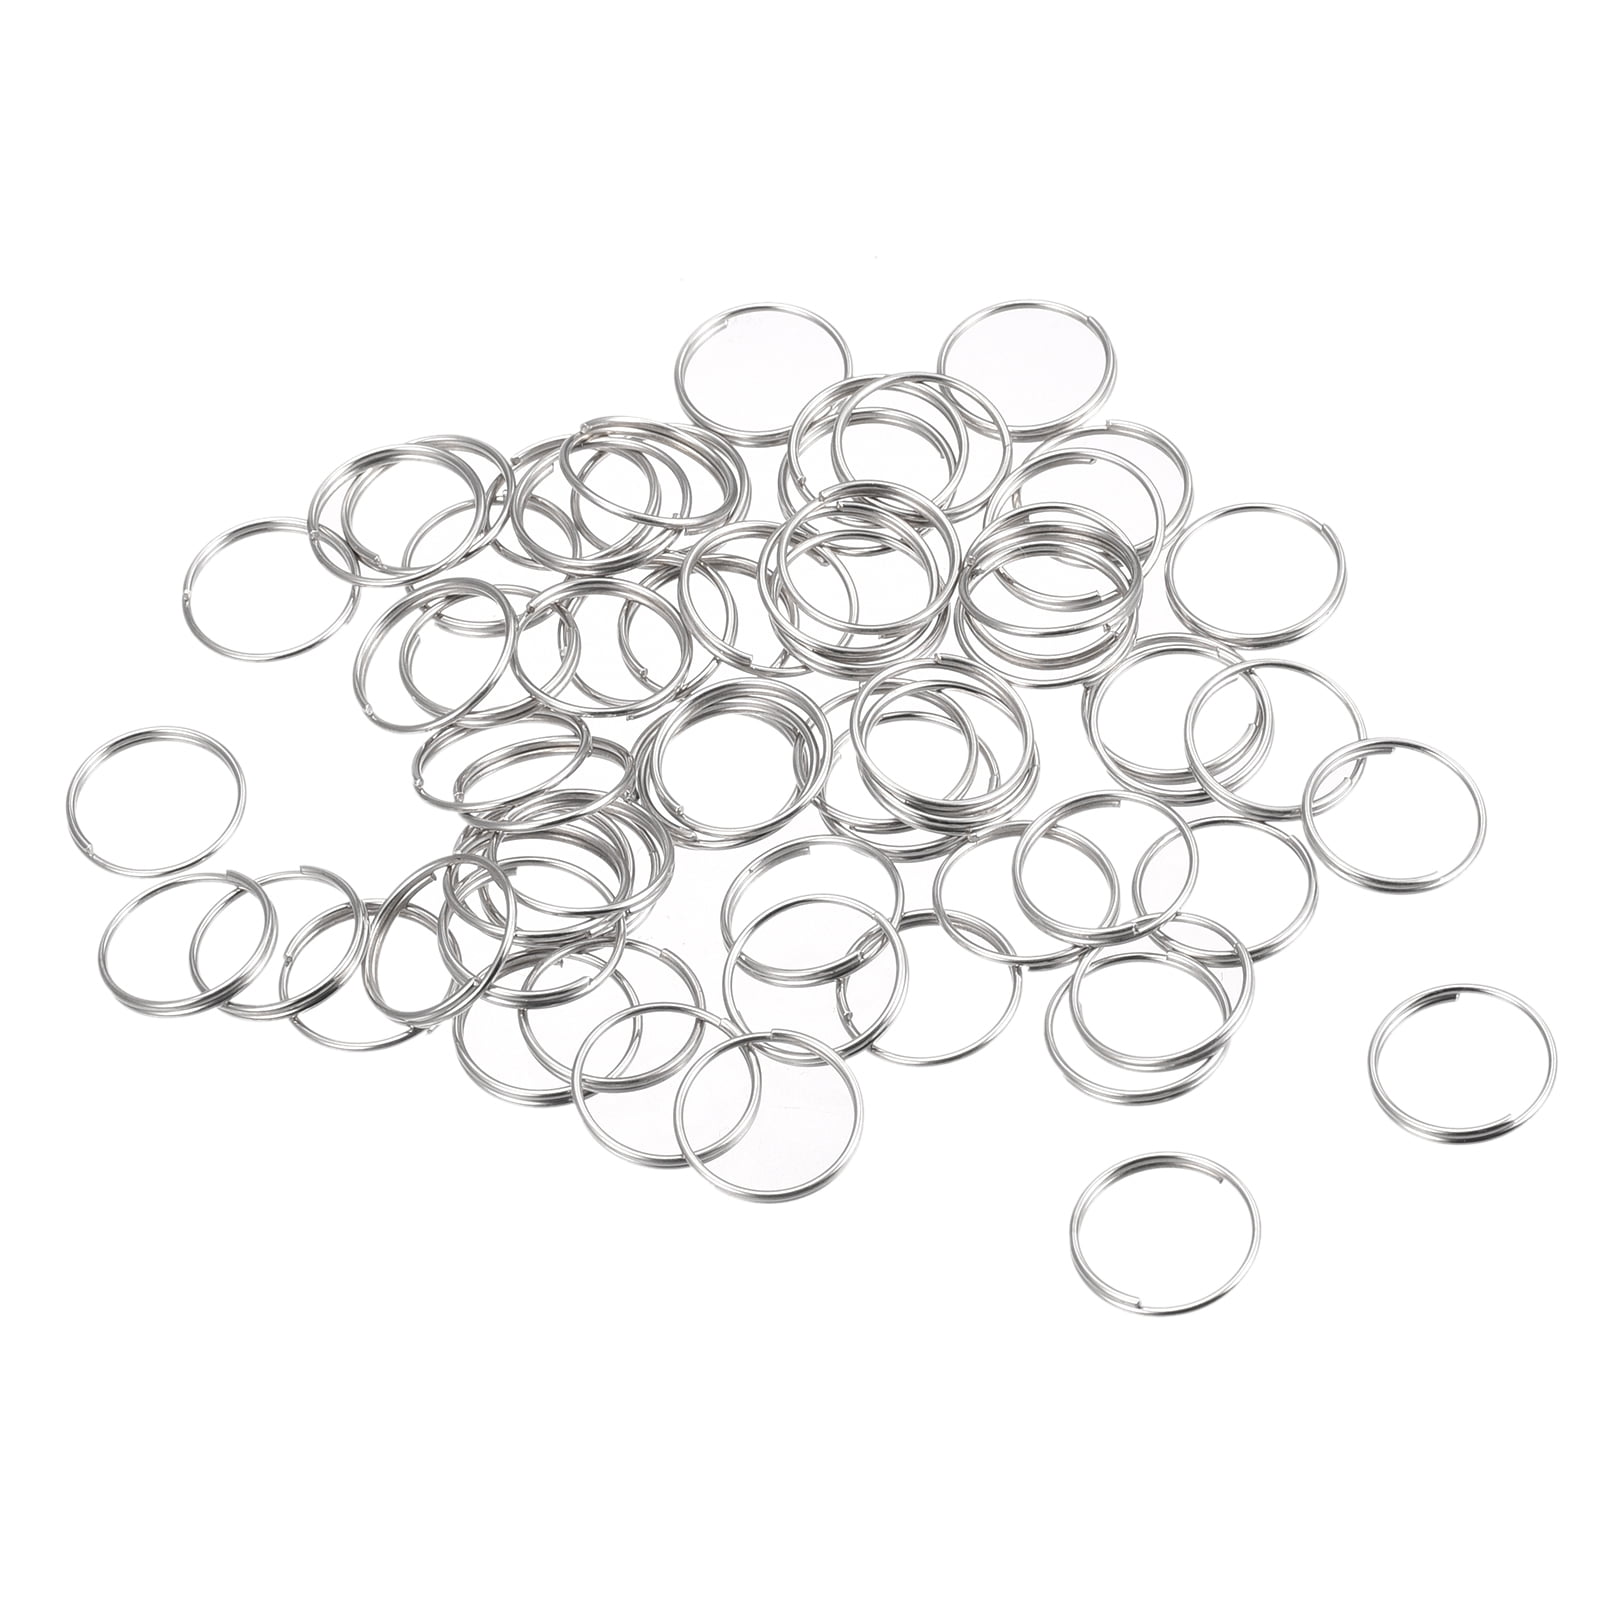 Double Loops Split Rings, 10mm Small Round Key Ring Parts for DIY Crafts  Making, Silver Tone 120Pcs